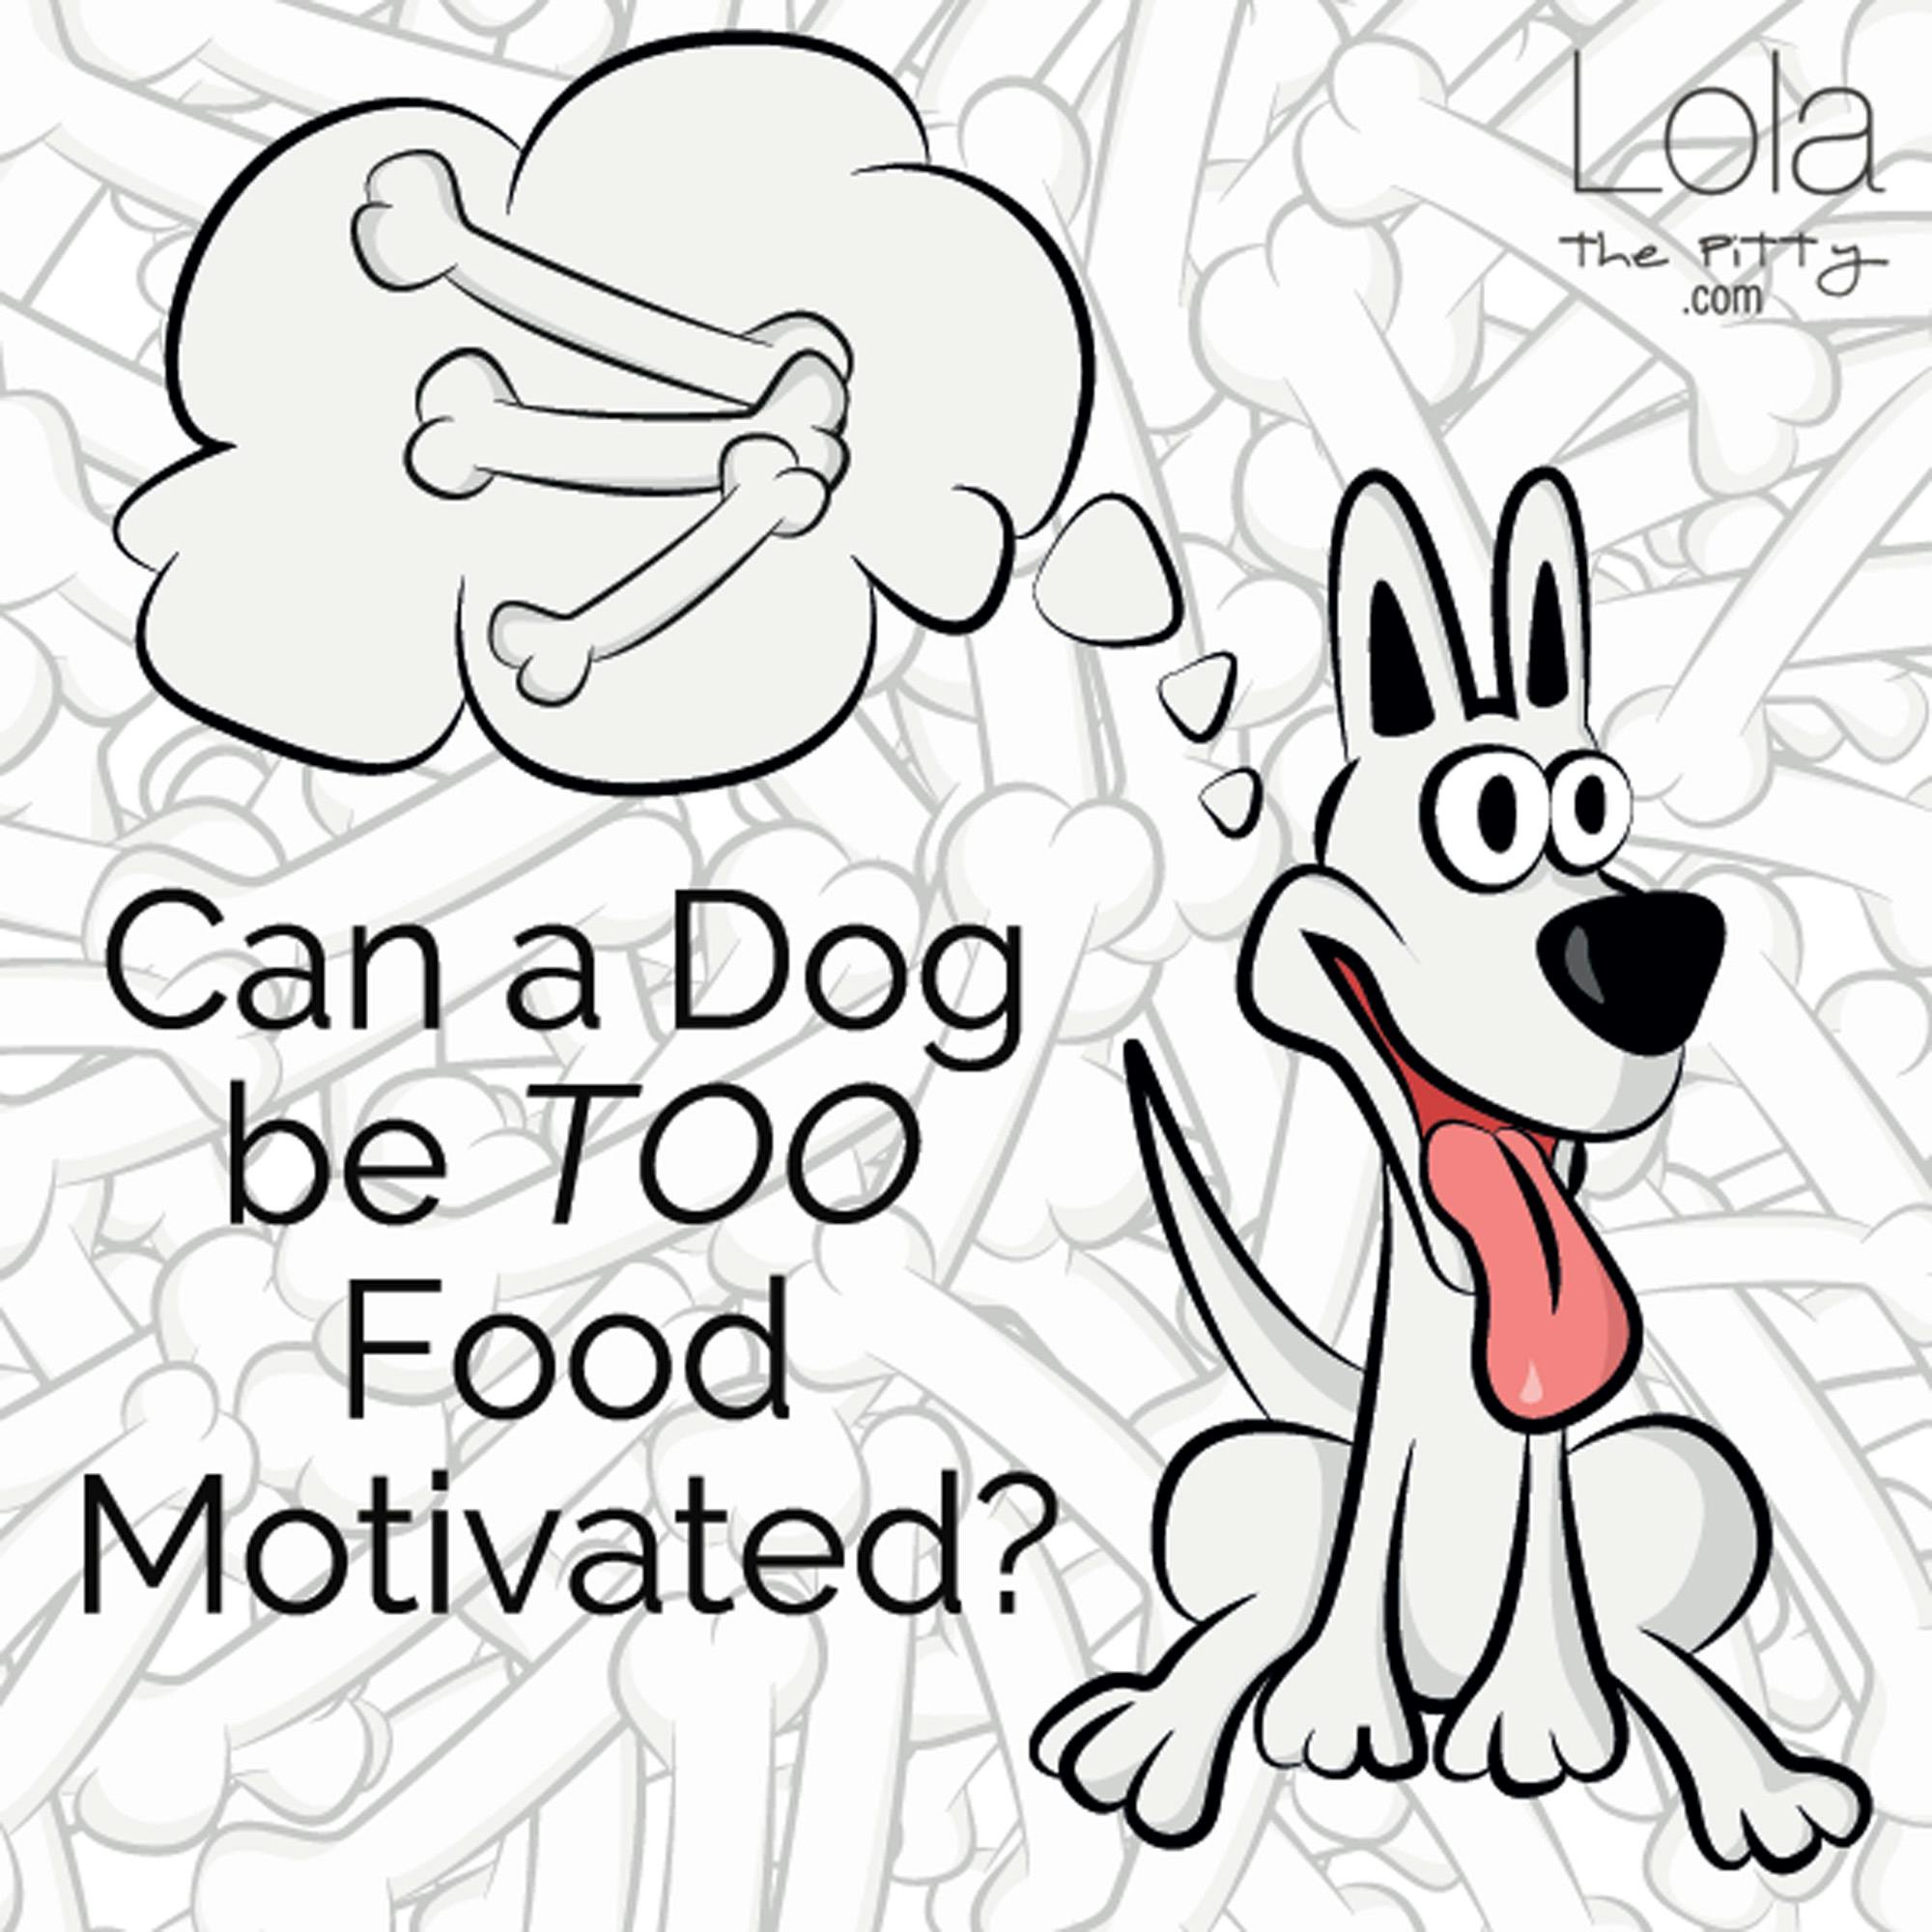 Can a dog be too food motivated?